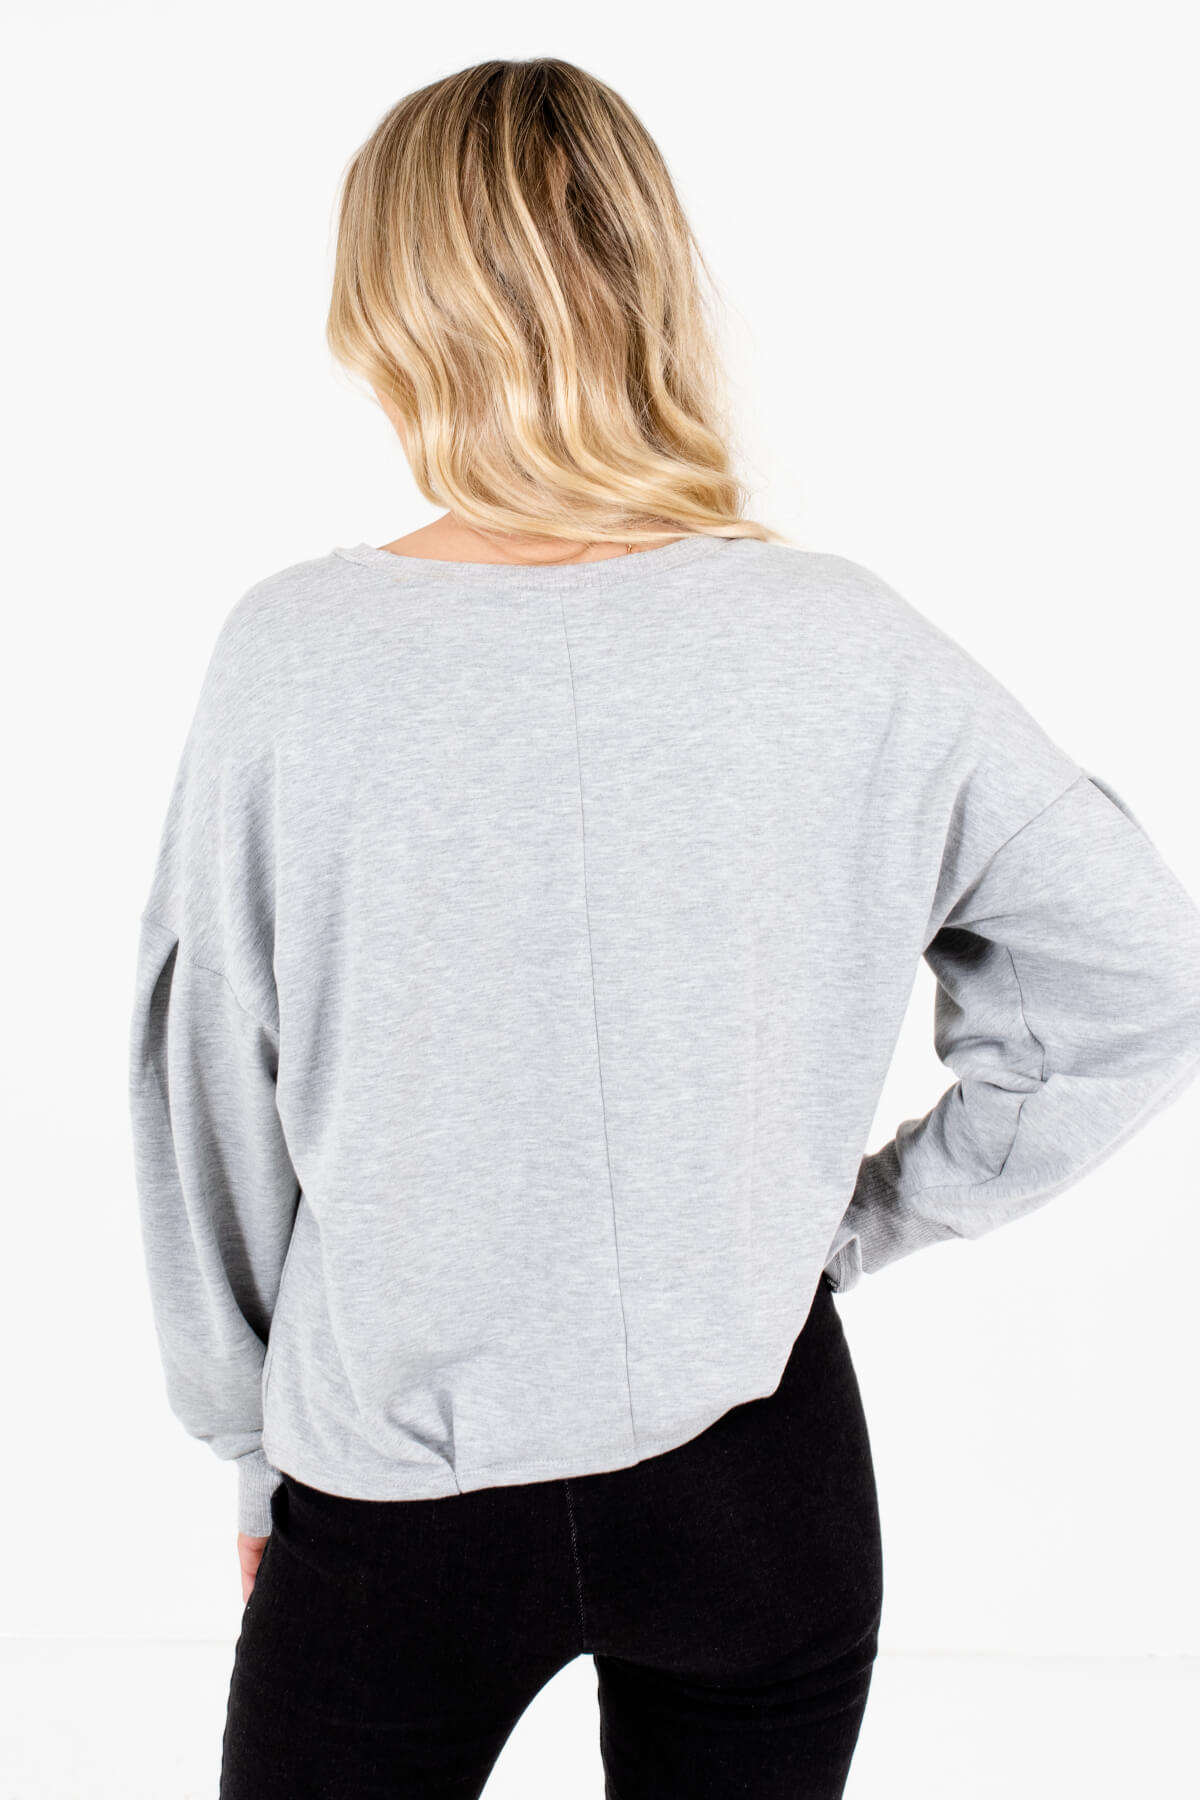 Women's Heather Gray Pleated Accented Boutique Pullover